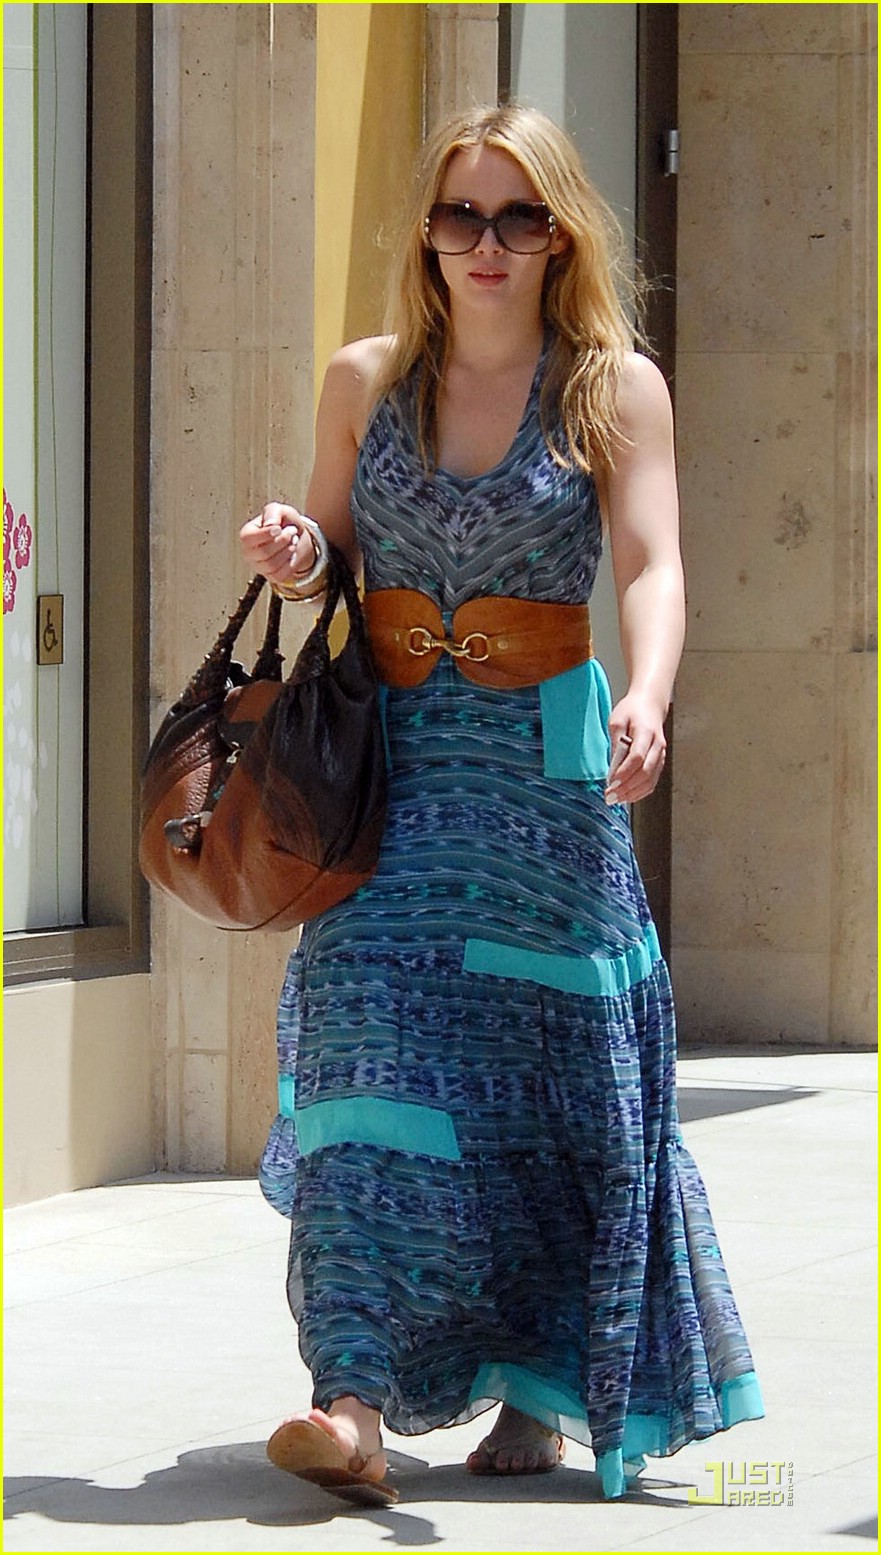 [HilaryDuff.belts+up+in+a+halter+maxidress+while+out+shopping+in+Glendale,+Calif07.07.08(justjared).JPG]